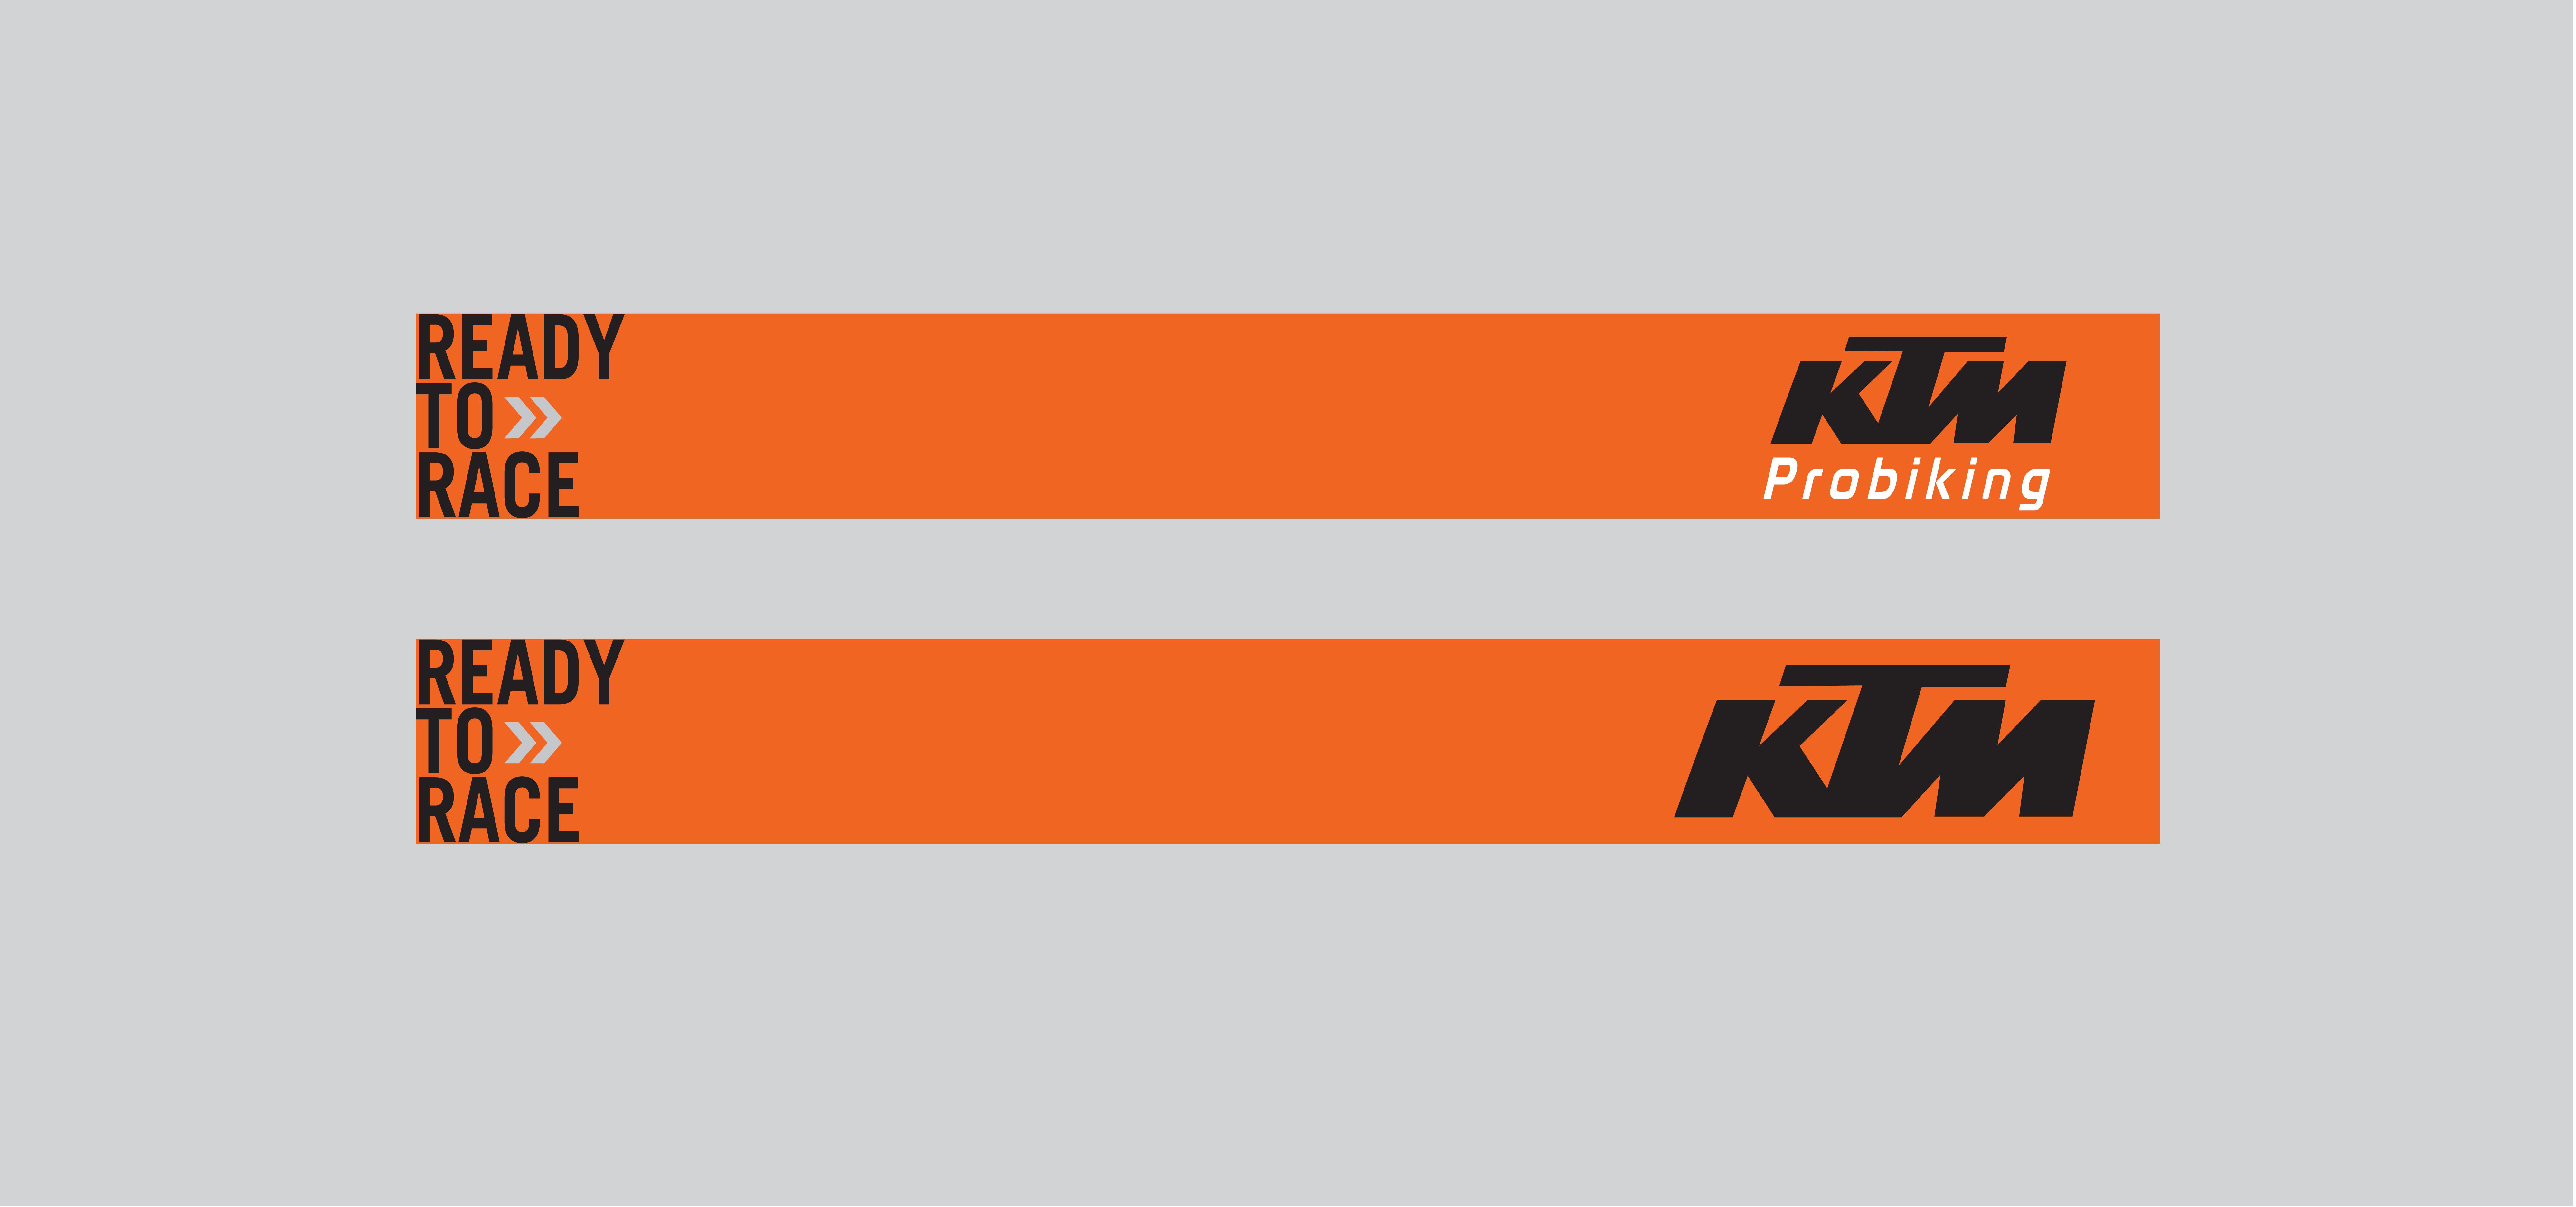 1 Set Ktm Sticker Motorcycle Decals Logo Ready To Race Adventure Racing Kit  Exc 250 300 Duke 200 690 1290 390 Rc 125 Stickers - AliExpress